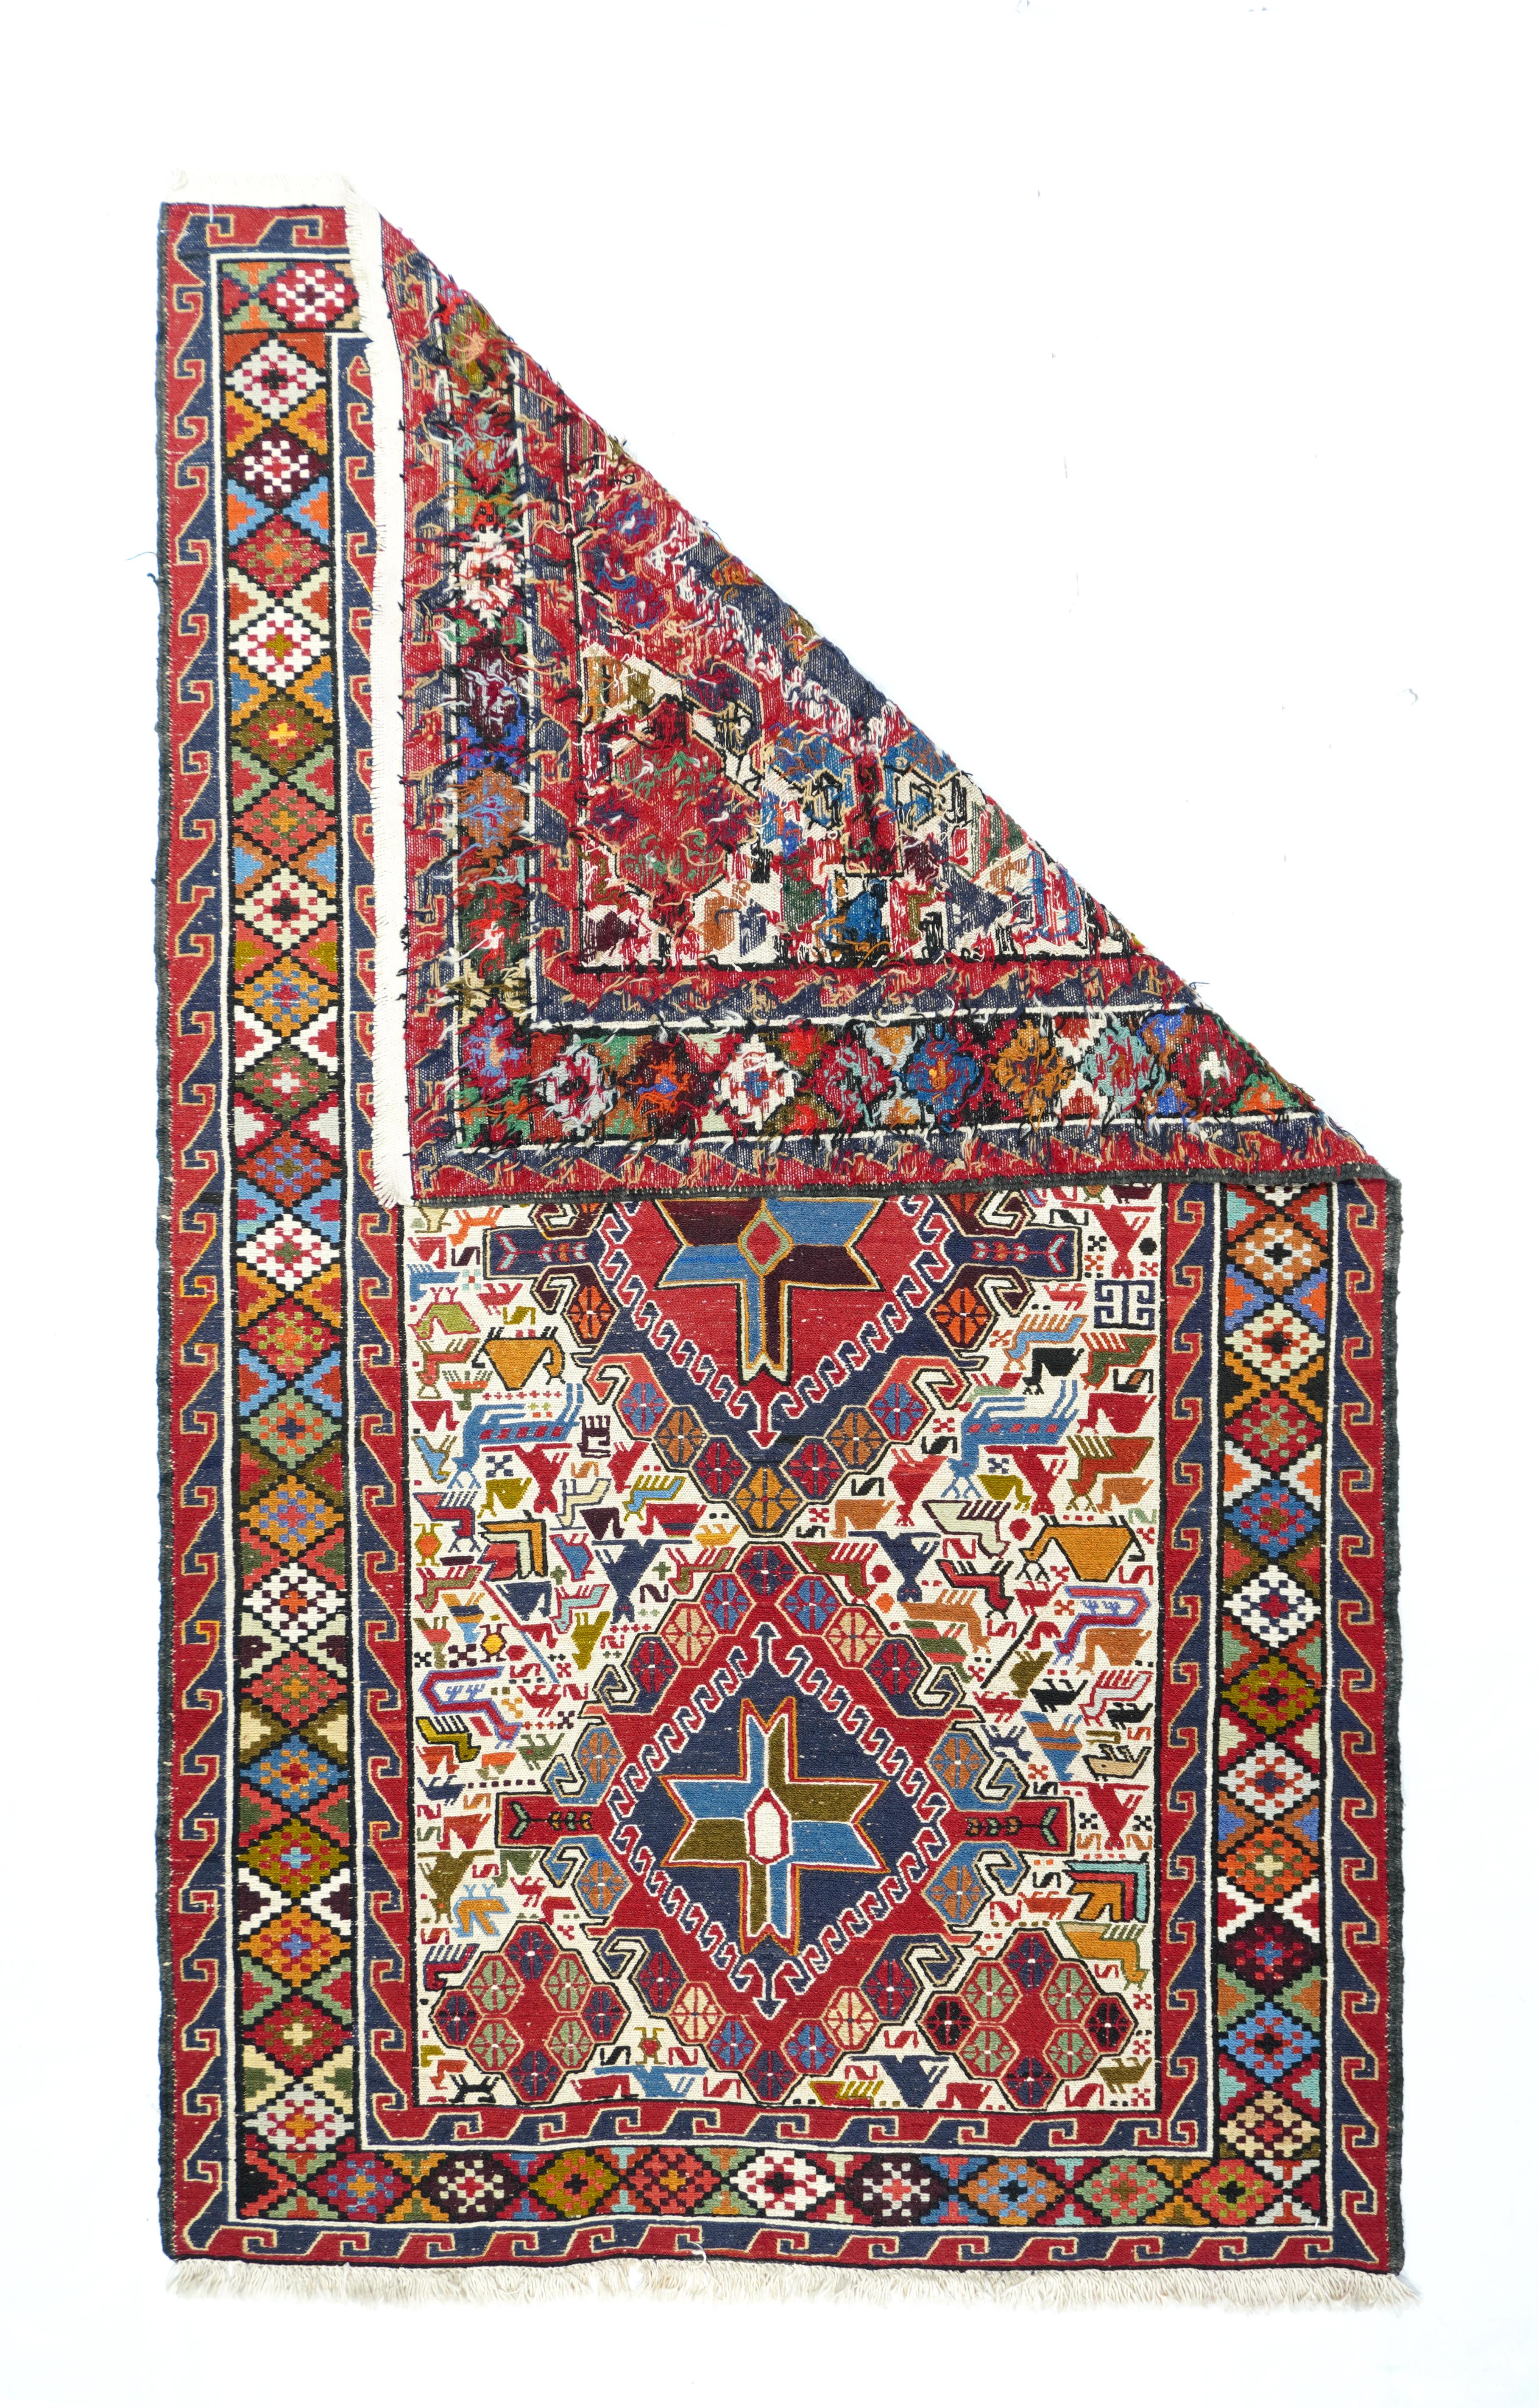 Vintage Sumak Rug 4' x 6'7''. The ecru field shows three hooked diamond medallions wit interior stars and scrolling boteh edges, all surrounded by birds and animals including dromedaries. Dark brown strip-style border with colorful nested stepped